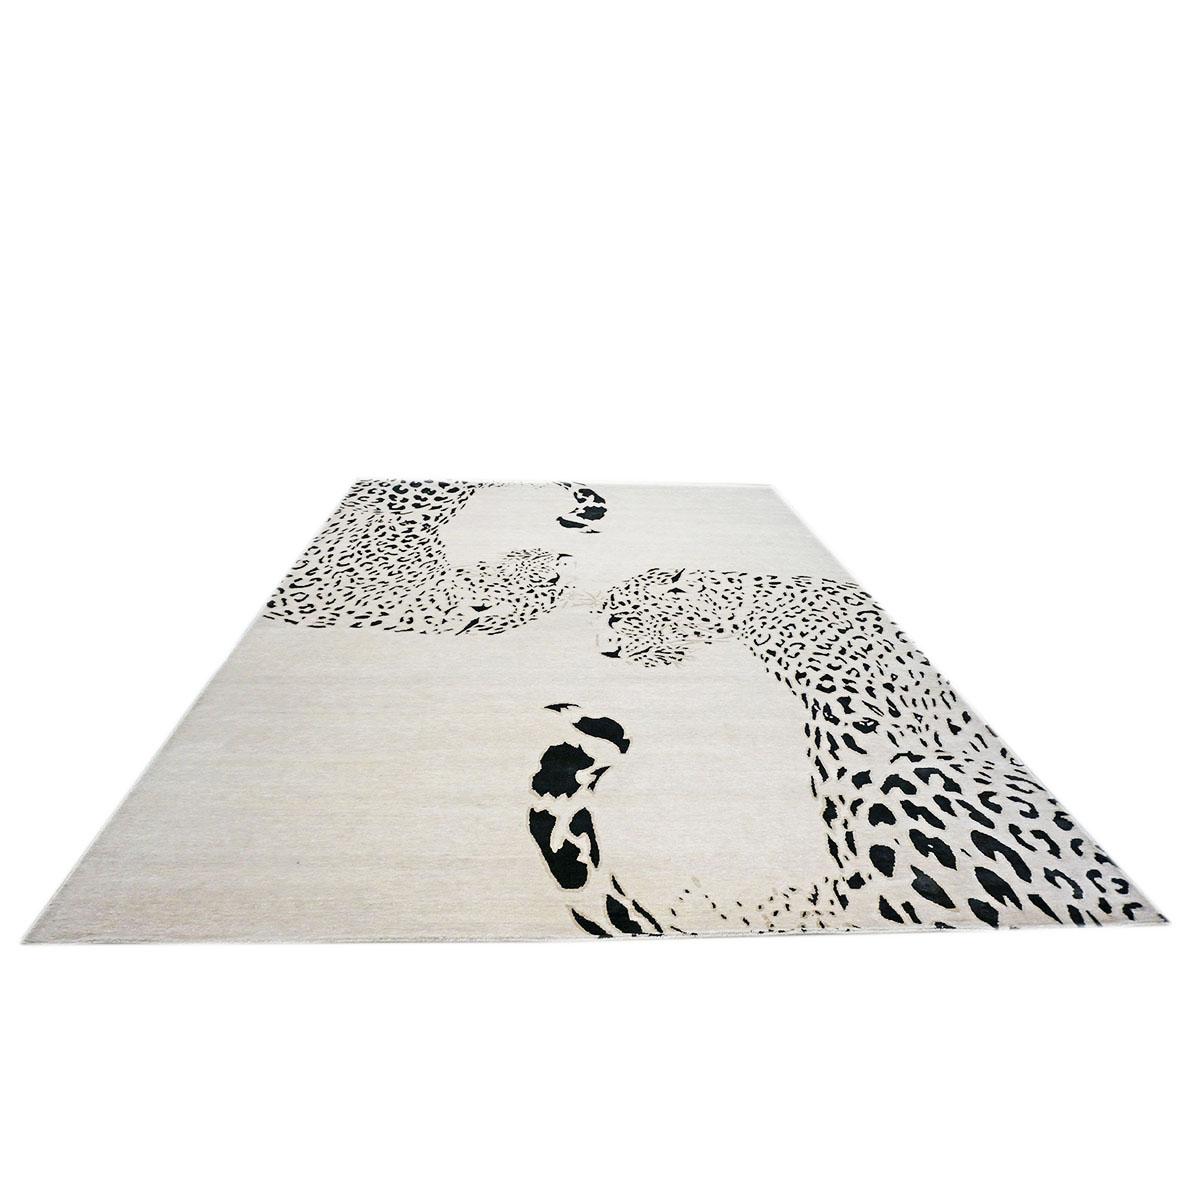 Ashly Fine Rugs presents a New Modern Inspired Wool & Silk 10x14 Ivory & Black Jaguar Handmade Area rug with lustrous shiny fibers and a thick durable pile. This gorgeous collection has been designed by our in-house designer and handmade by the